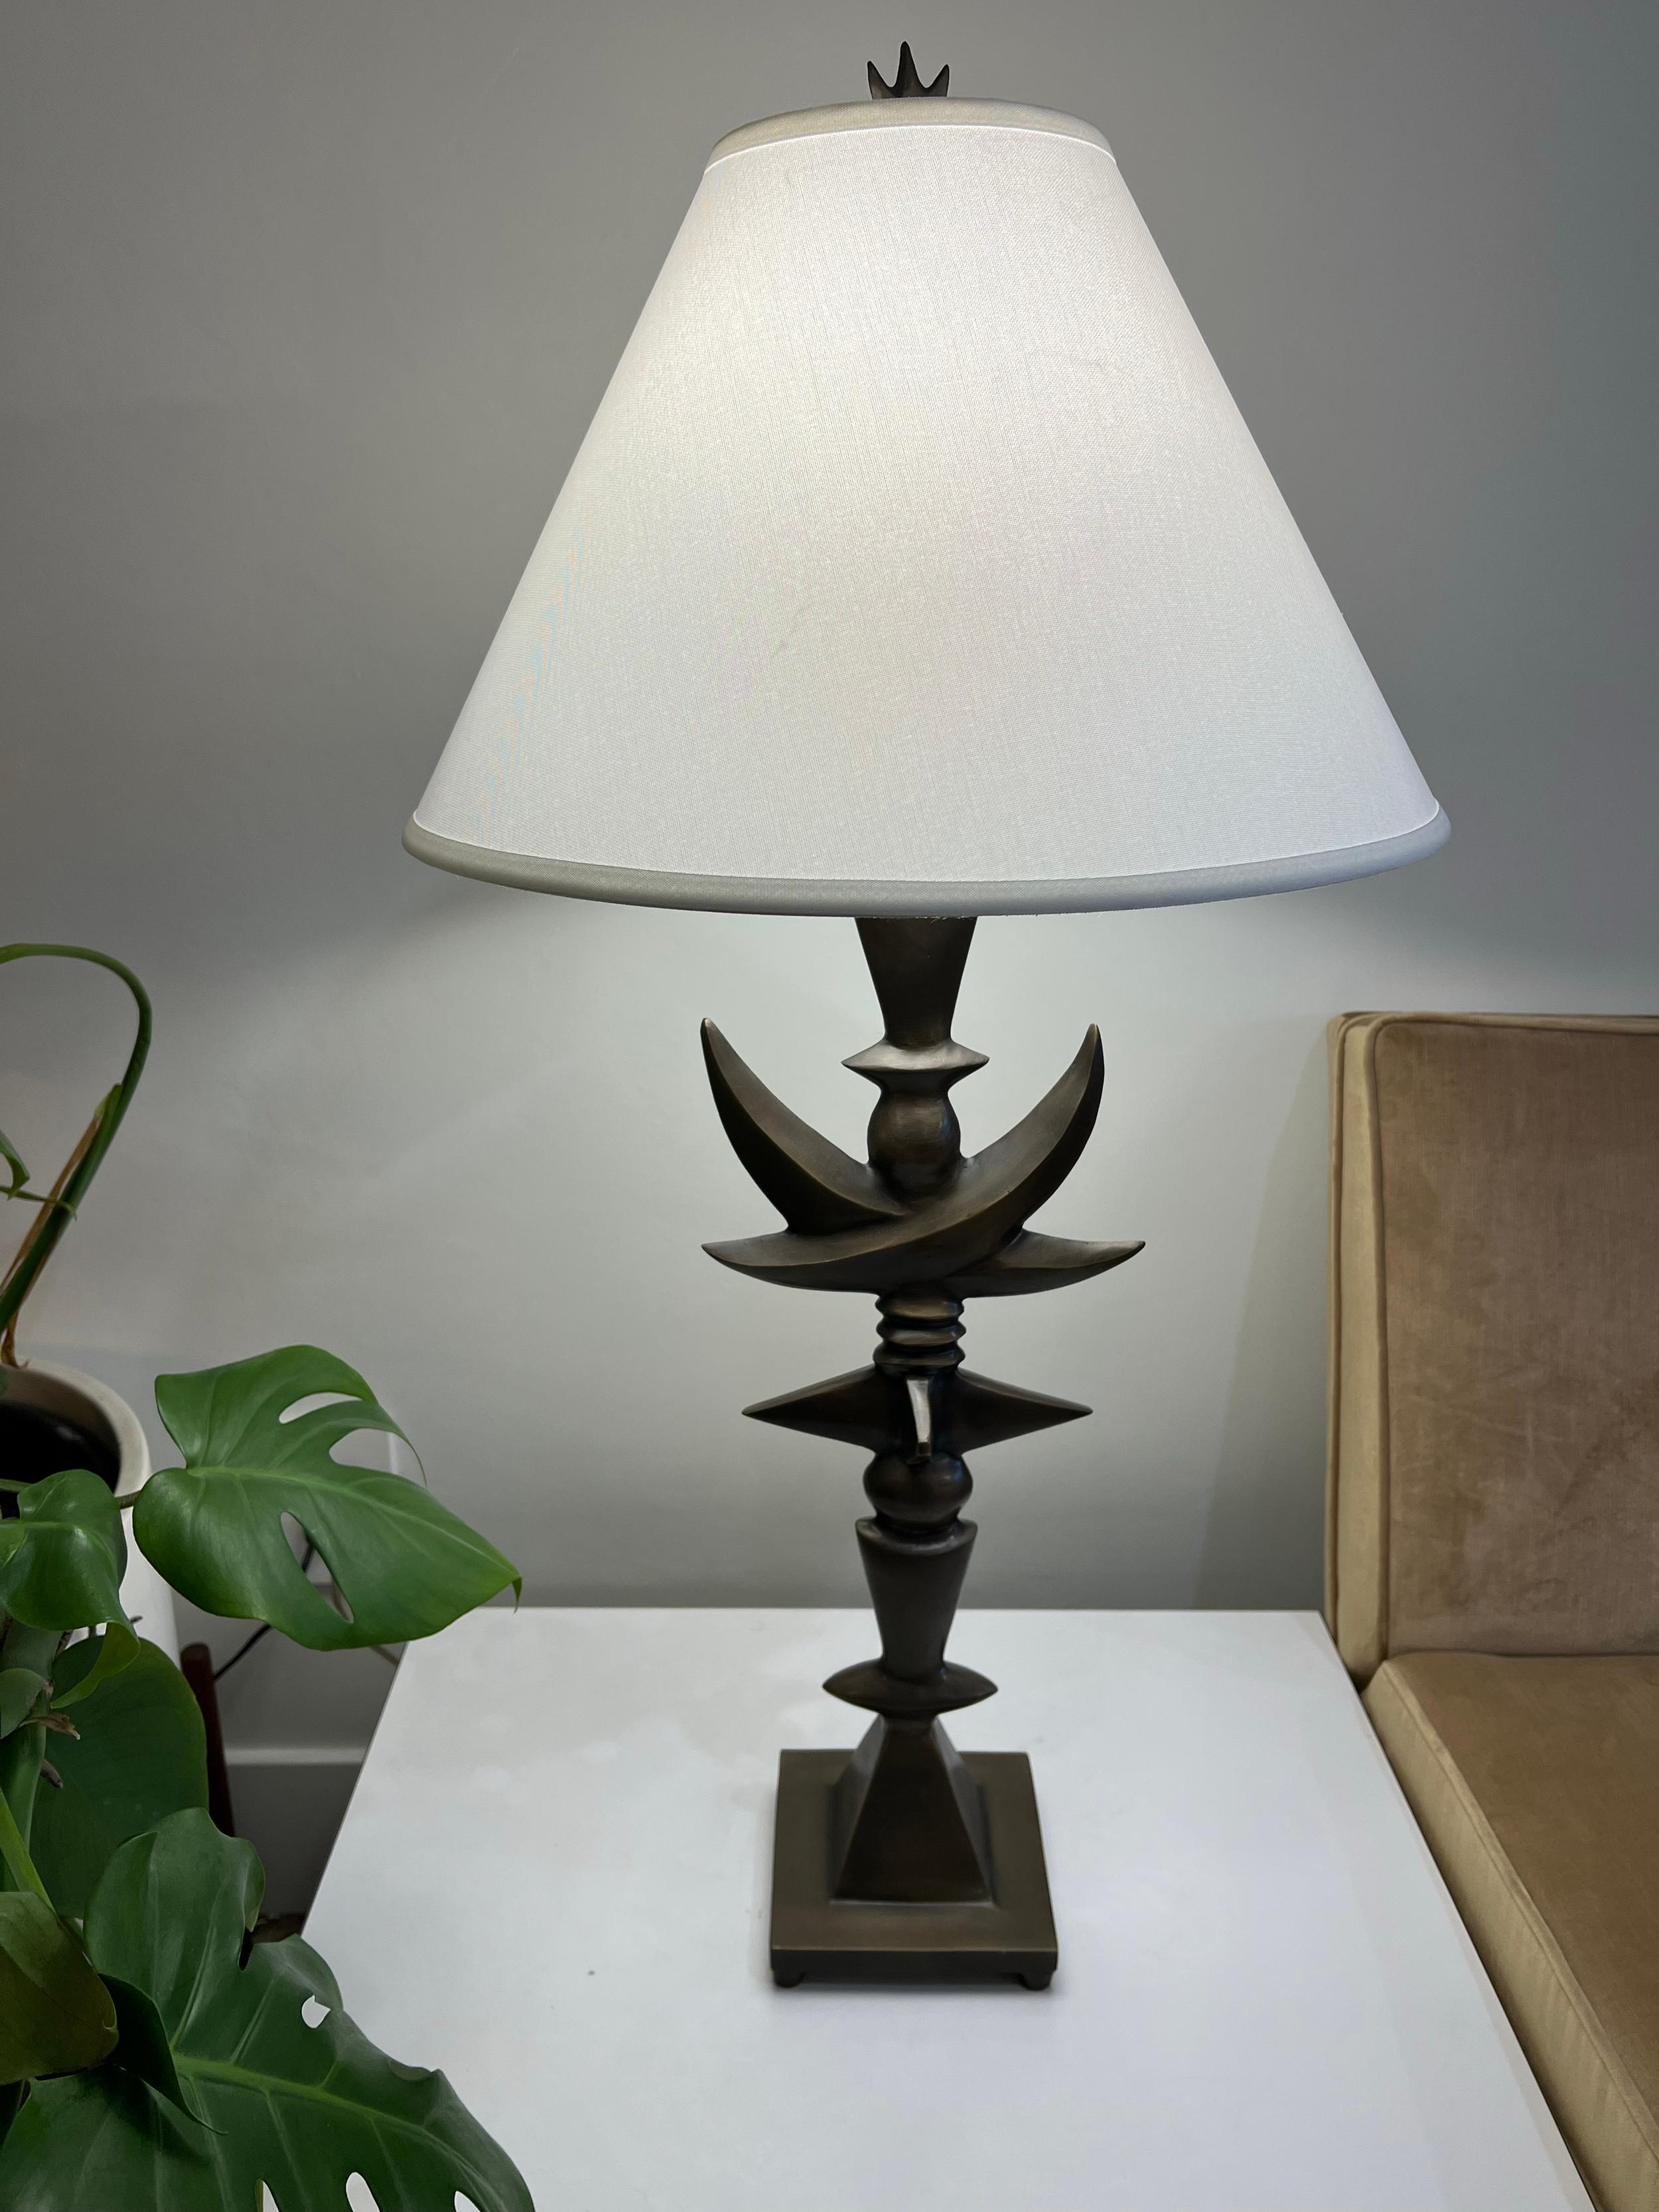 Vintage bronze table lamp by Tom Corbin, Totem IV. In great vintage condition, signed underneath the base. New shade, rewired, and original bronze finial. Incredibly well made, heavy, and stunning lines and shapes. Ready for use.